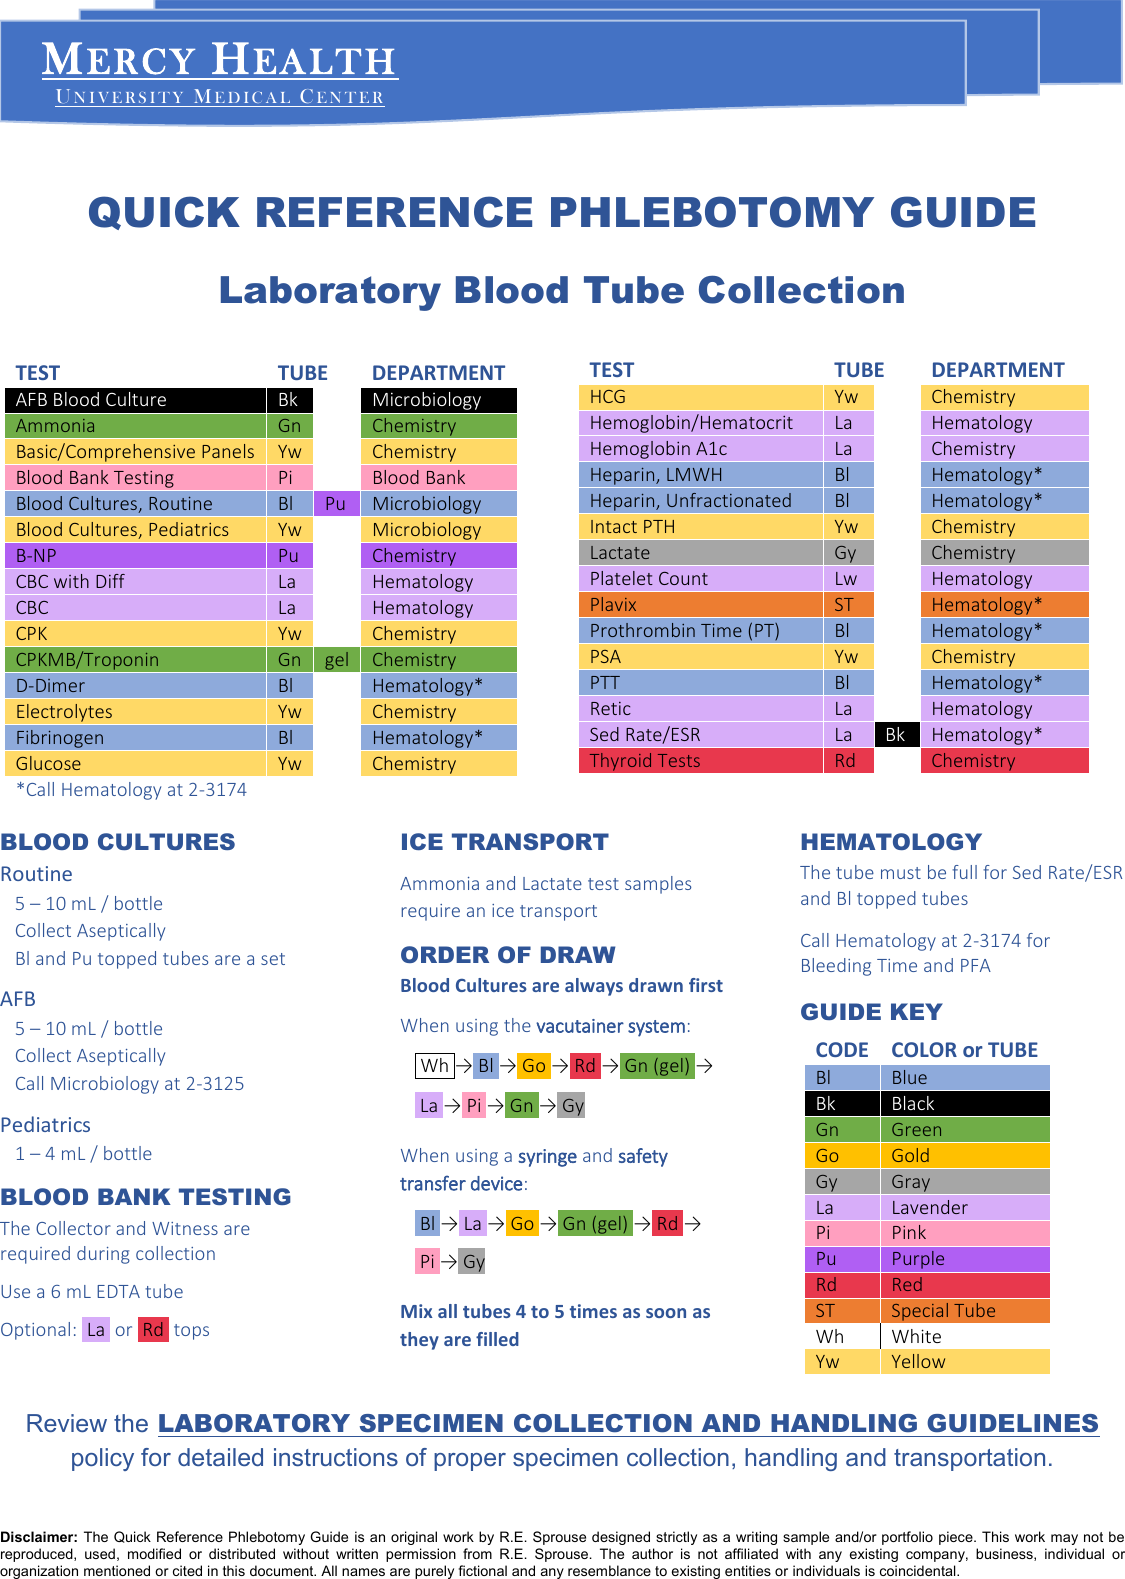 Page 1 of 1 - Quick Reference Phlebotomy Guide